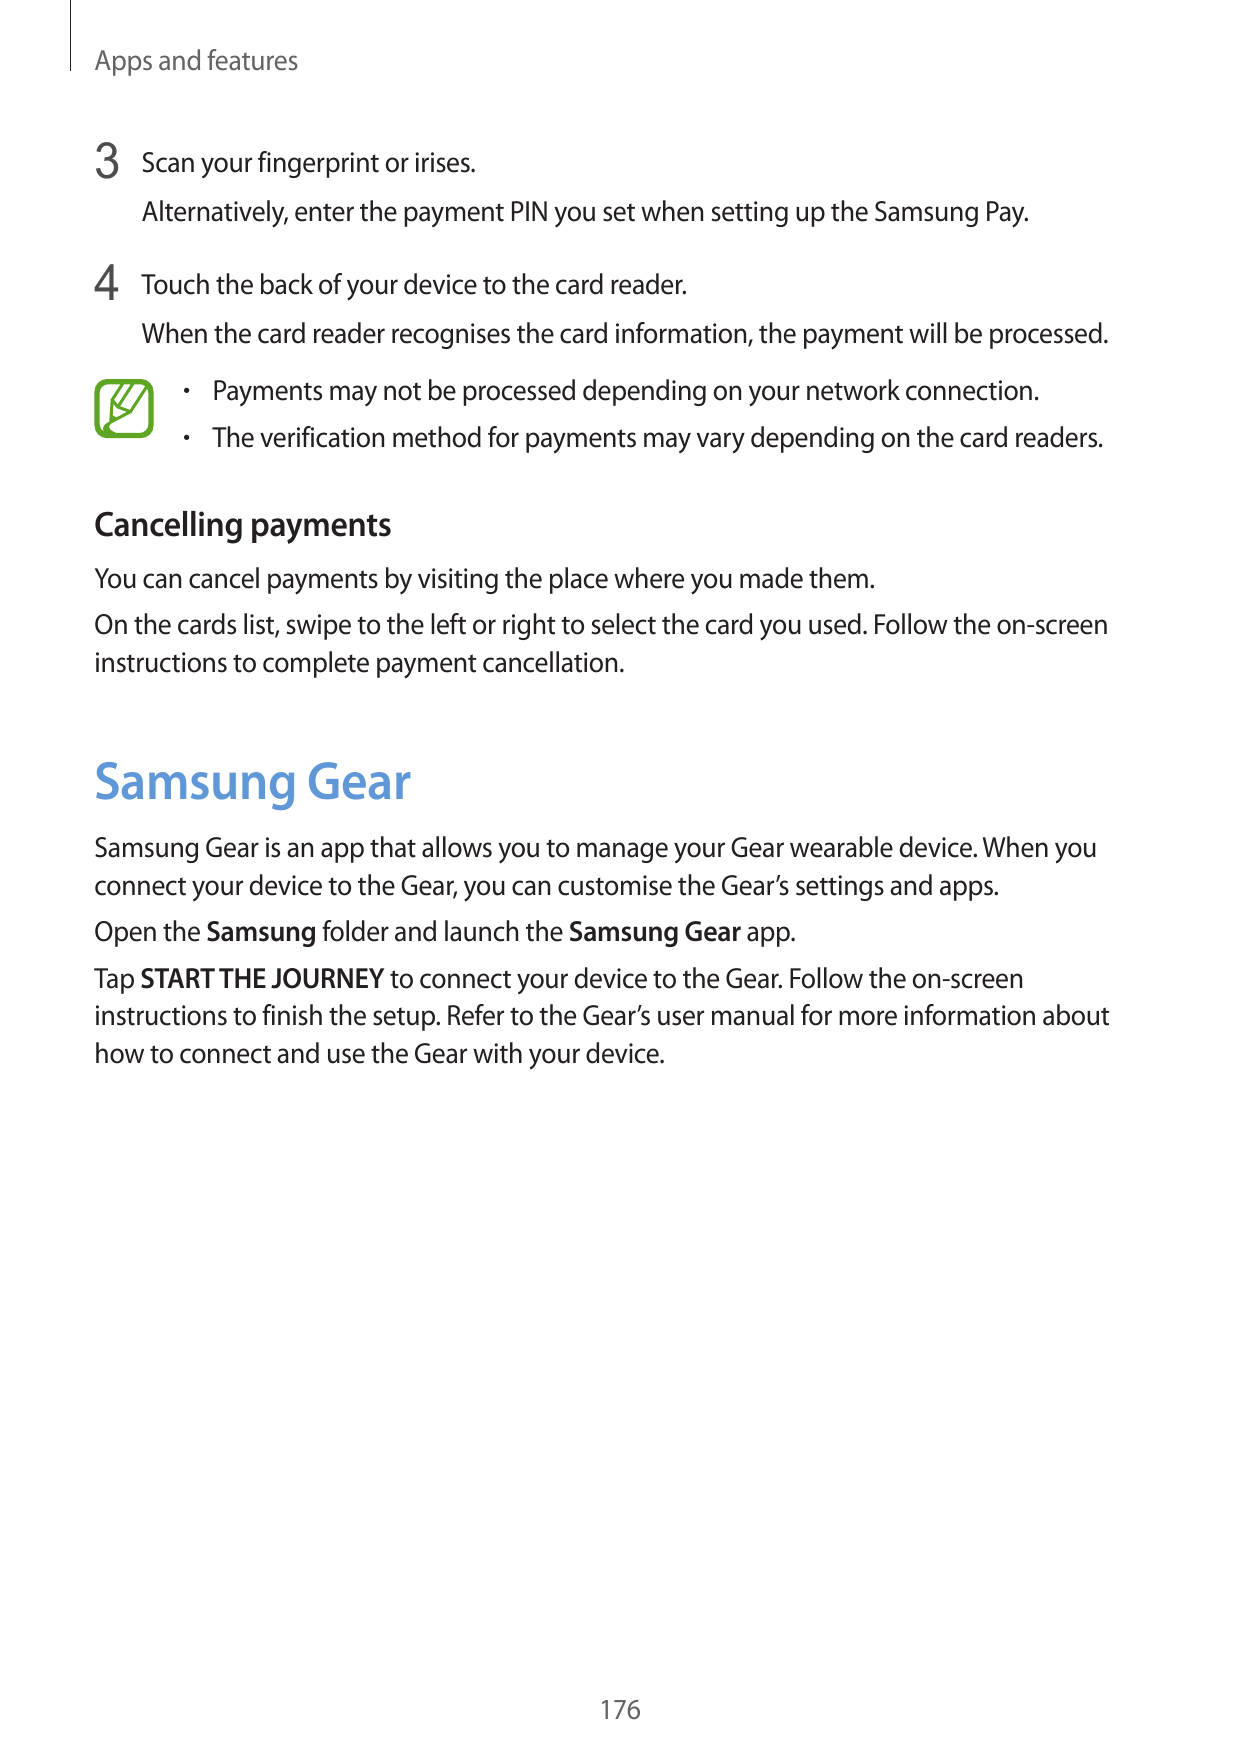 Apps and features3 Scan your fingerprint or irises.Alternatively, enter the payment PIN you set when setting up the Samsung Pay.